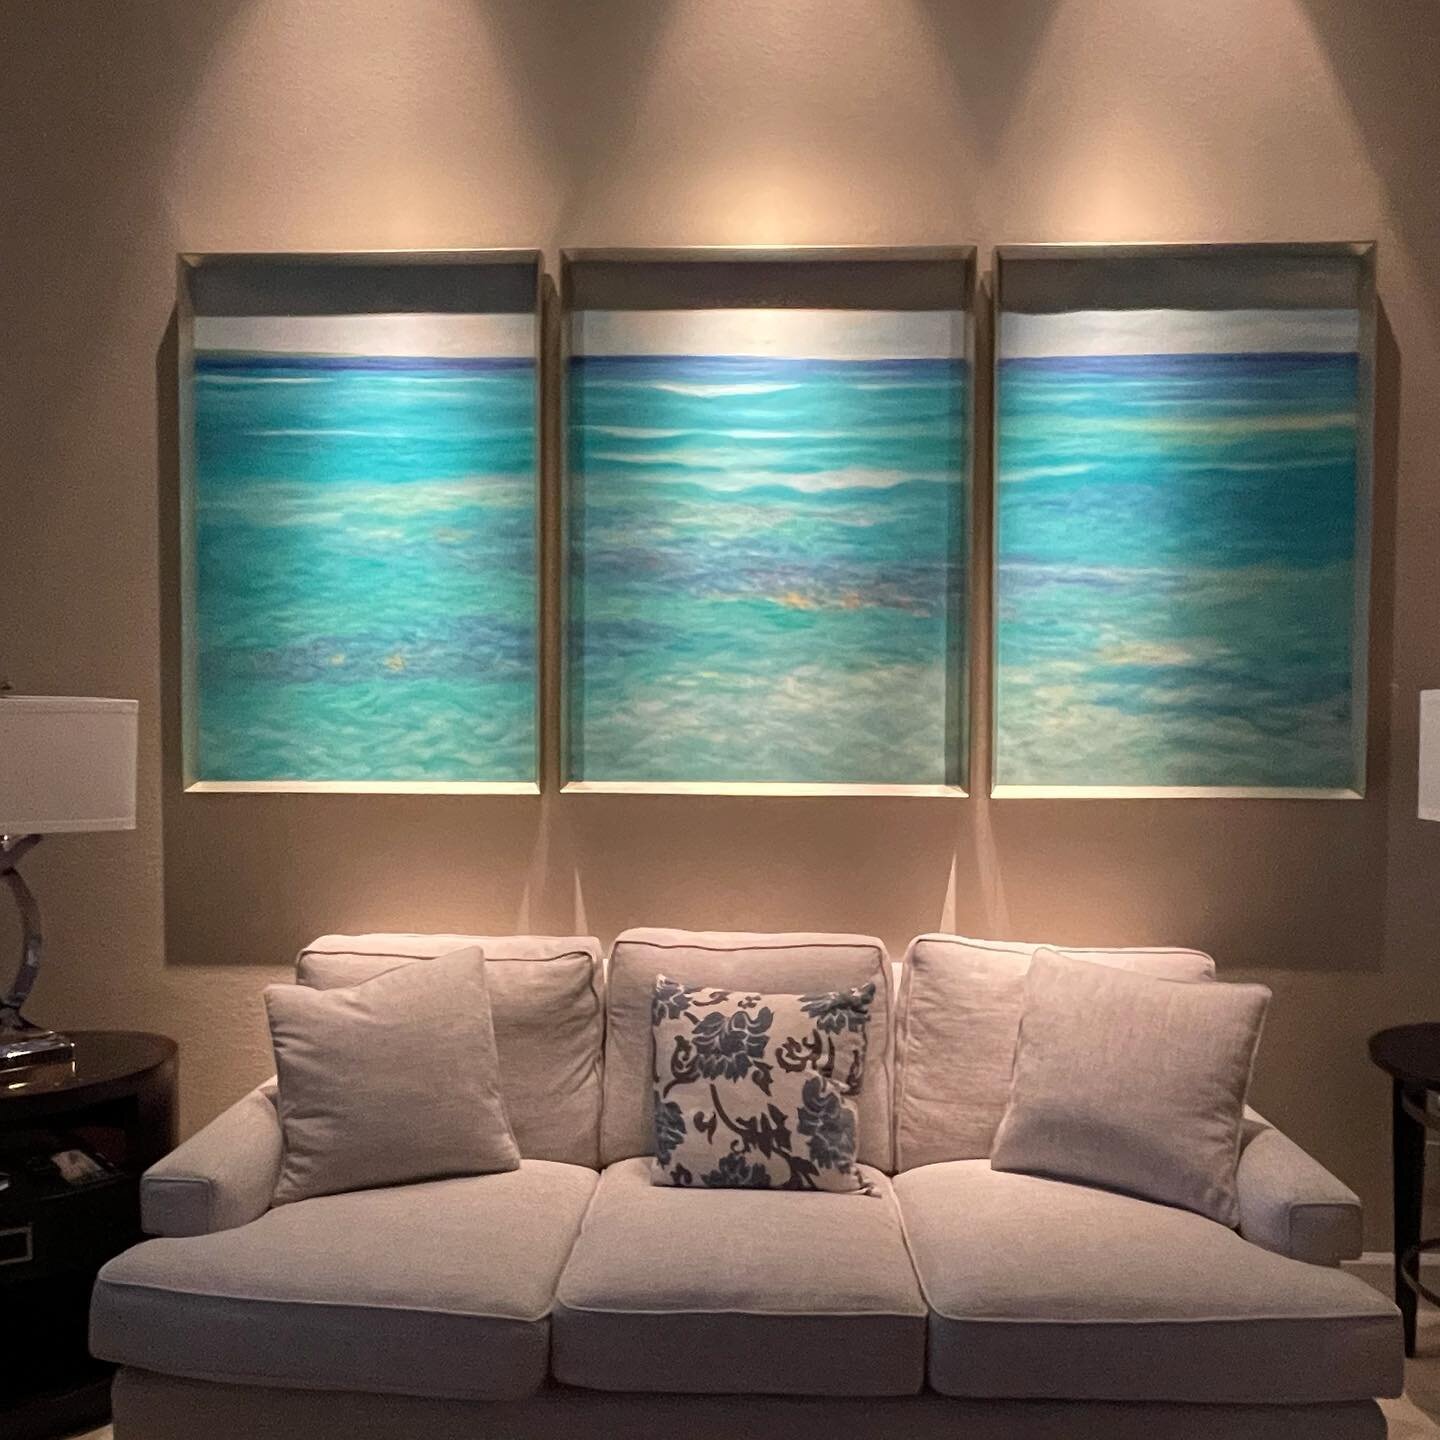 The shimmer of thousands of wavelettes moving in rhythm to the Earth&rsquo;s rotation in a sea of liquid turquoise.  Commission happily completed! #www.rolandrichardson.com
#Caribbeansea #sweepmeaway